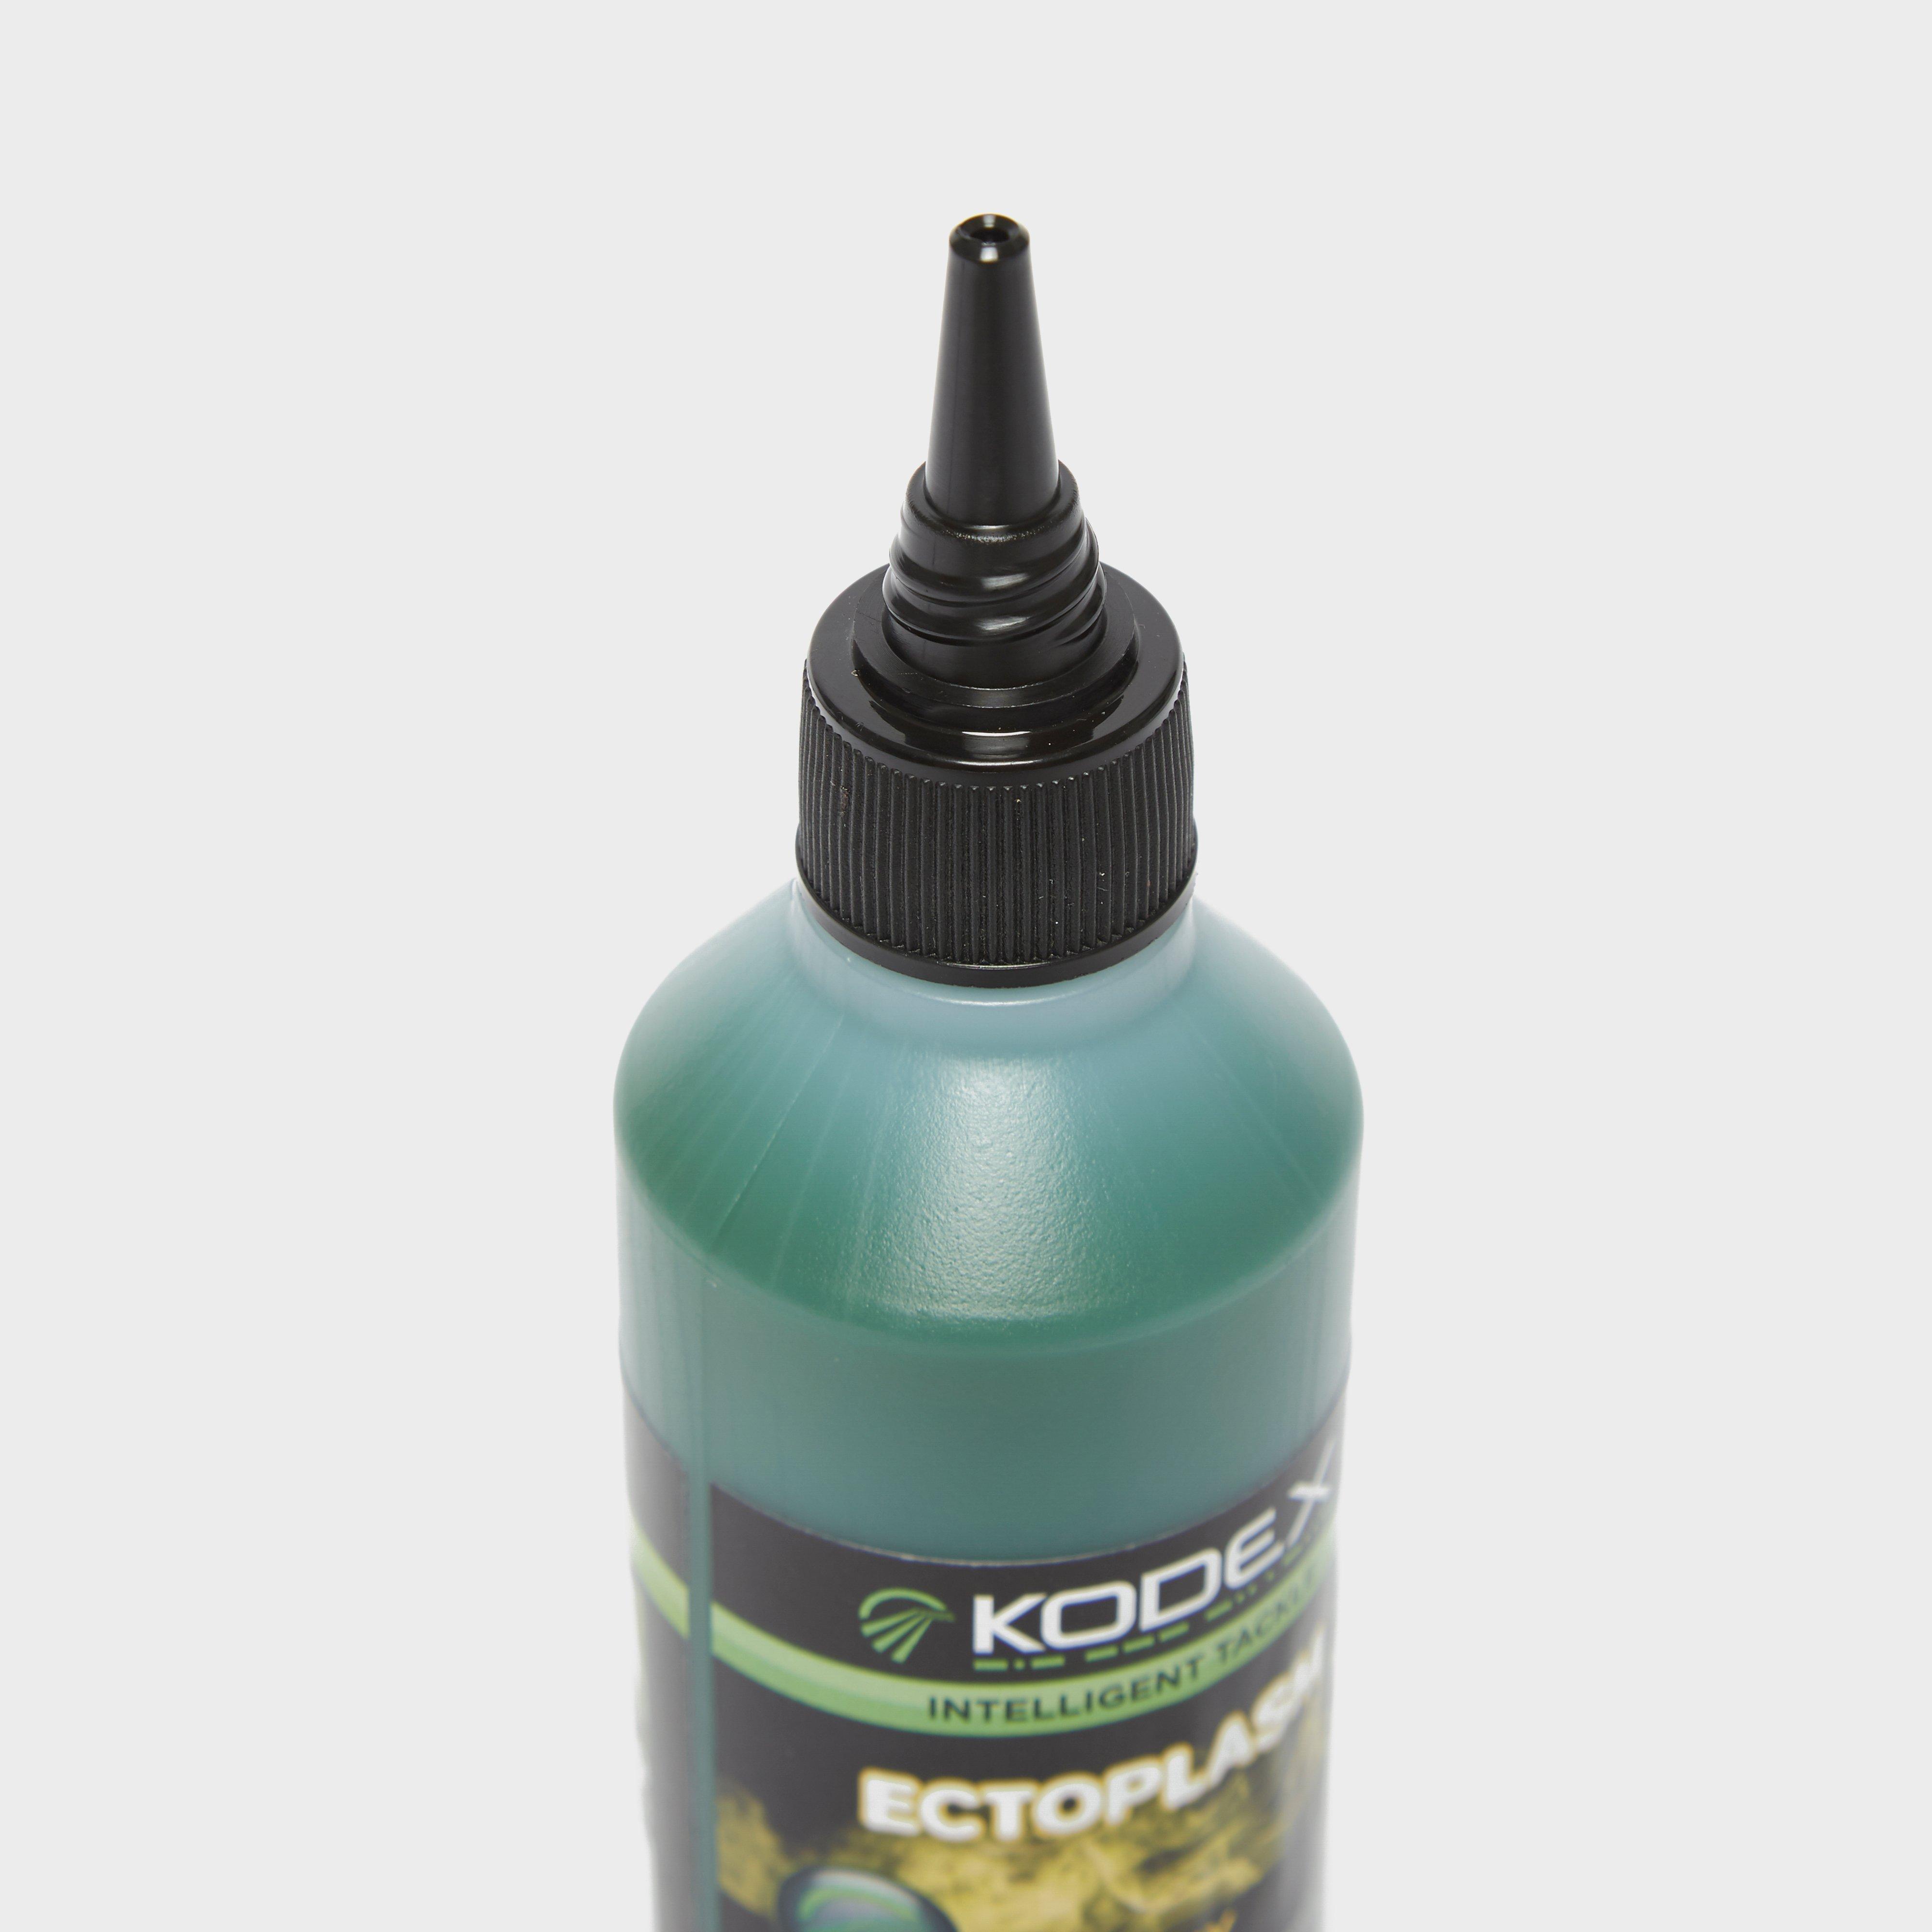 Middy Ectoplasm Corn 100ml Bottle Review